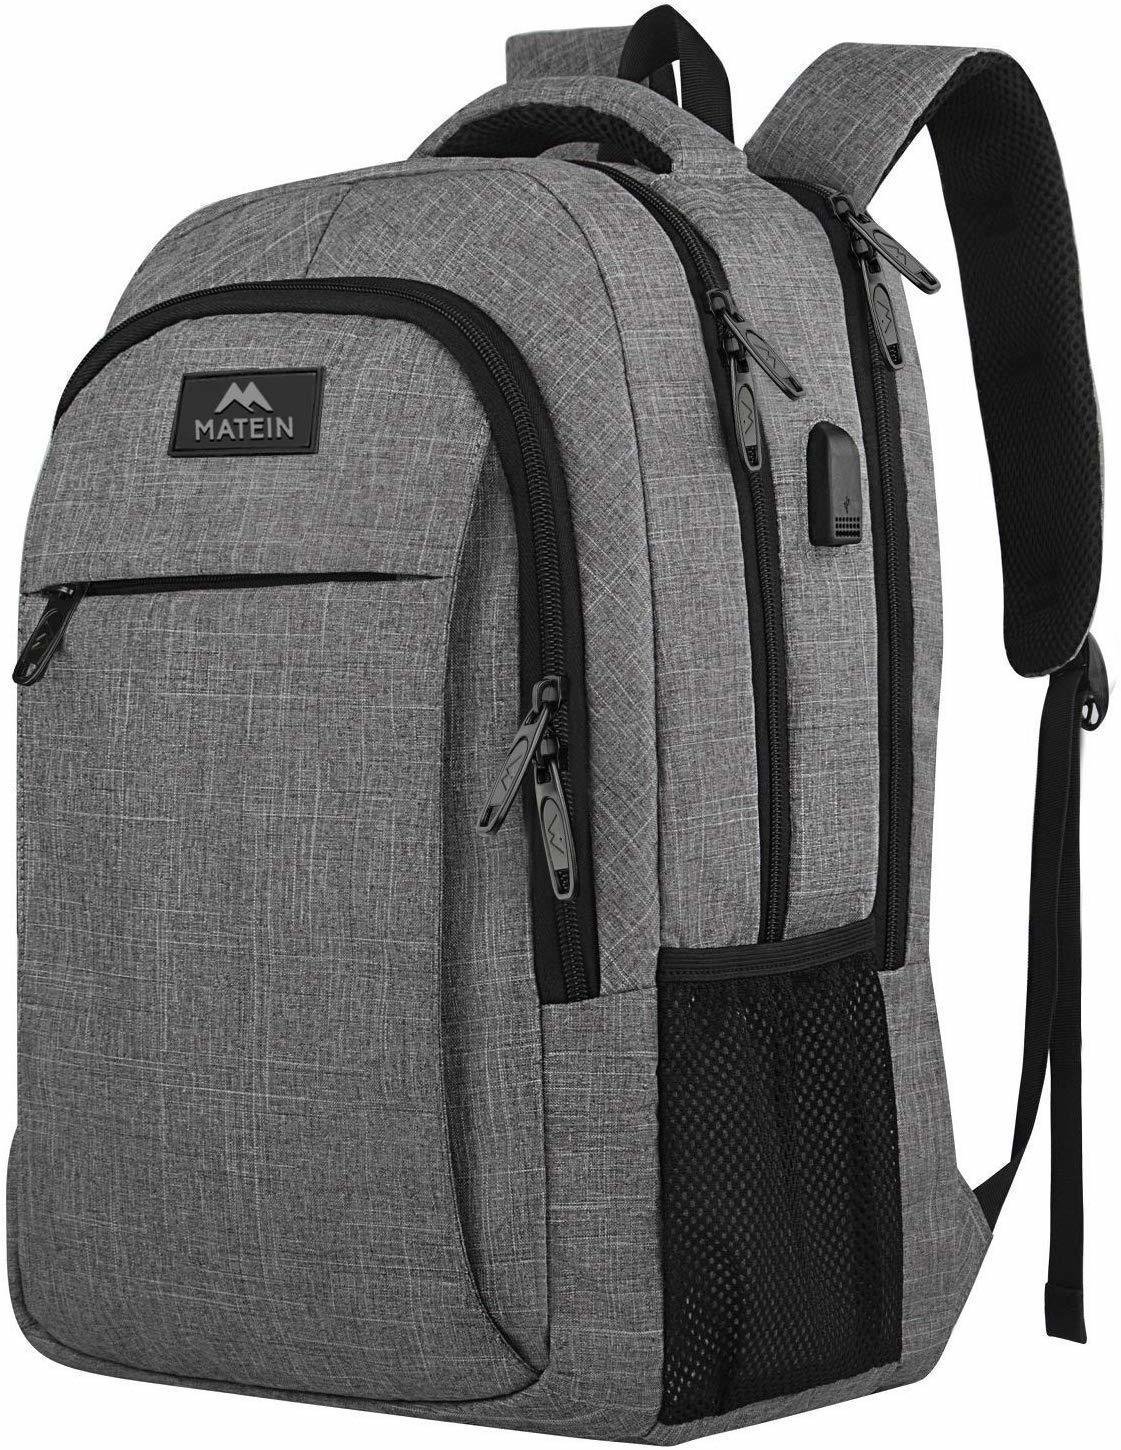 10 Backpack with a Laptop Compartment Suitable for Traveling 2